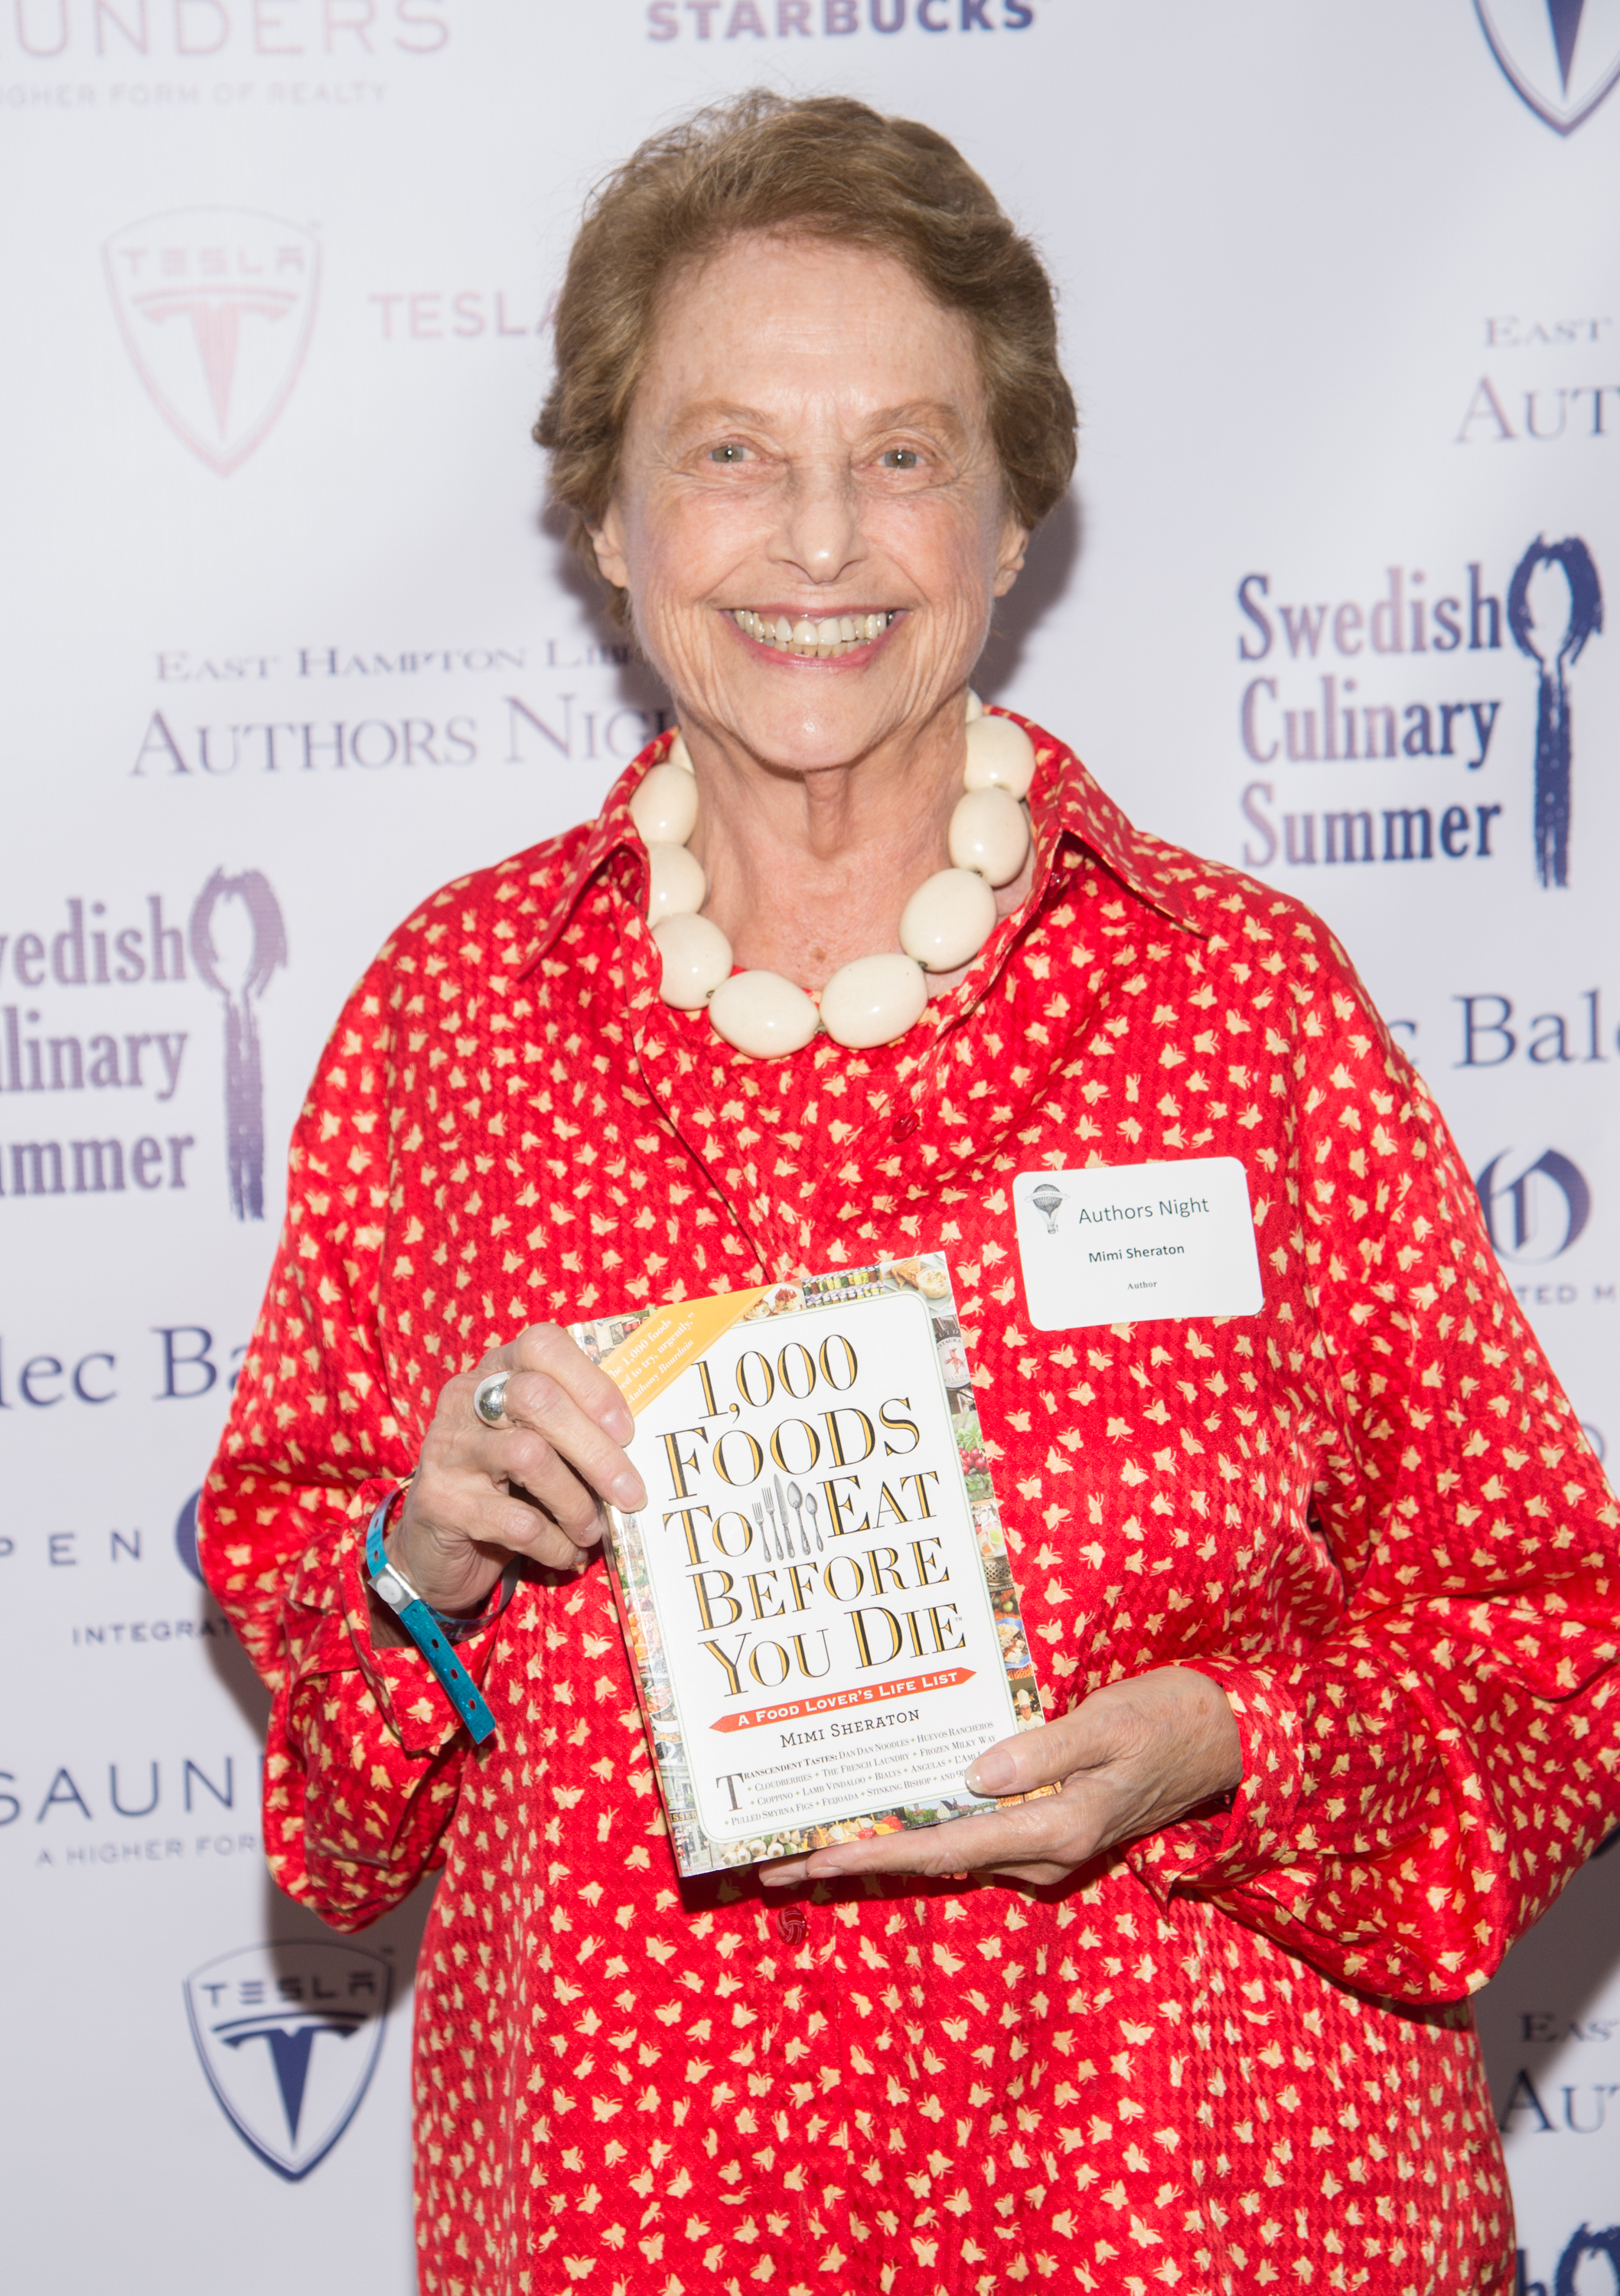 Mimi Sheraton posing with “1,000 Foods to Eat Before You Die”